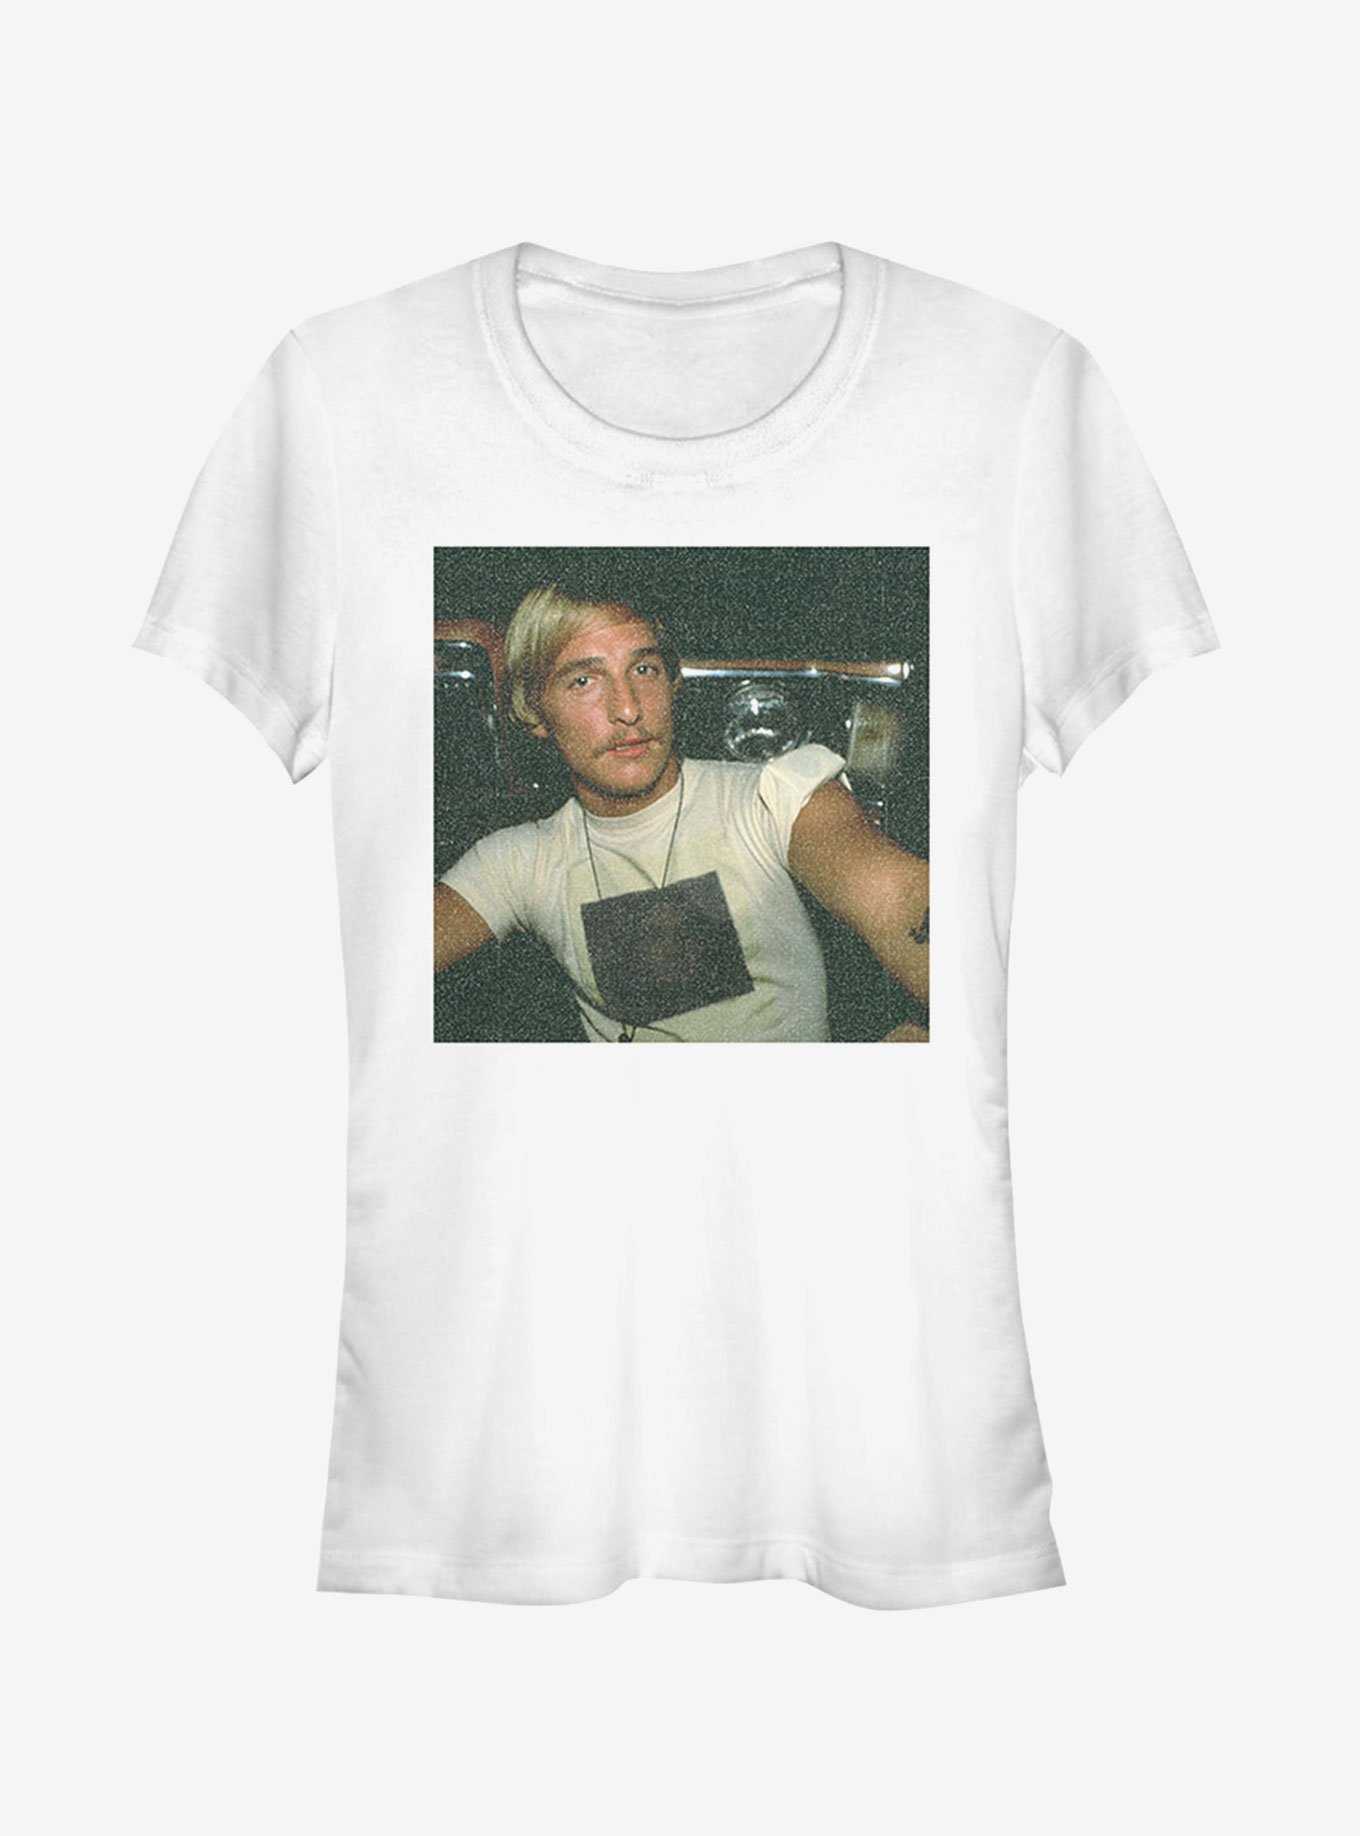 Dazed and Confused Ultimate Party Boy Girls T-Shirt, , hi-res